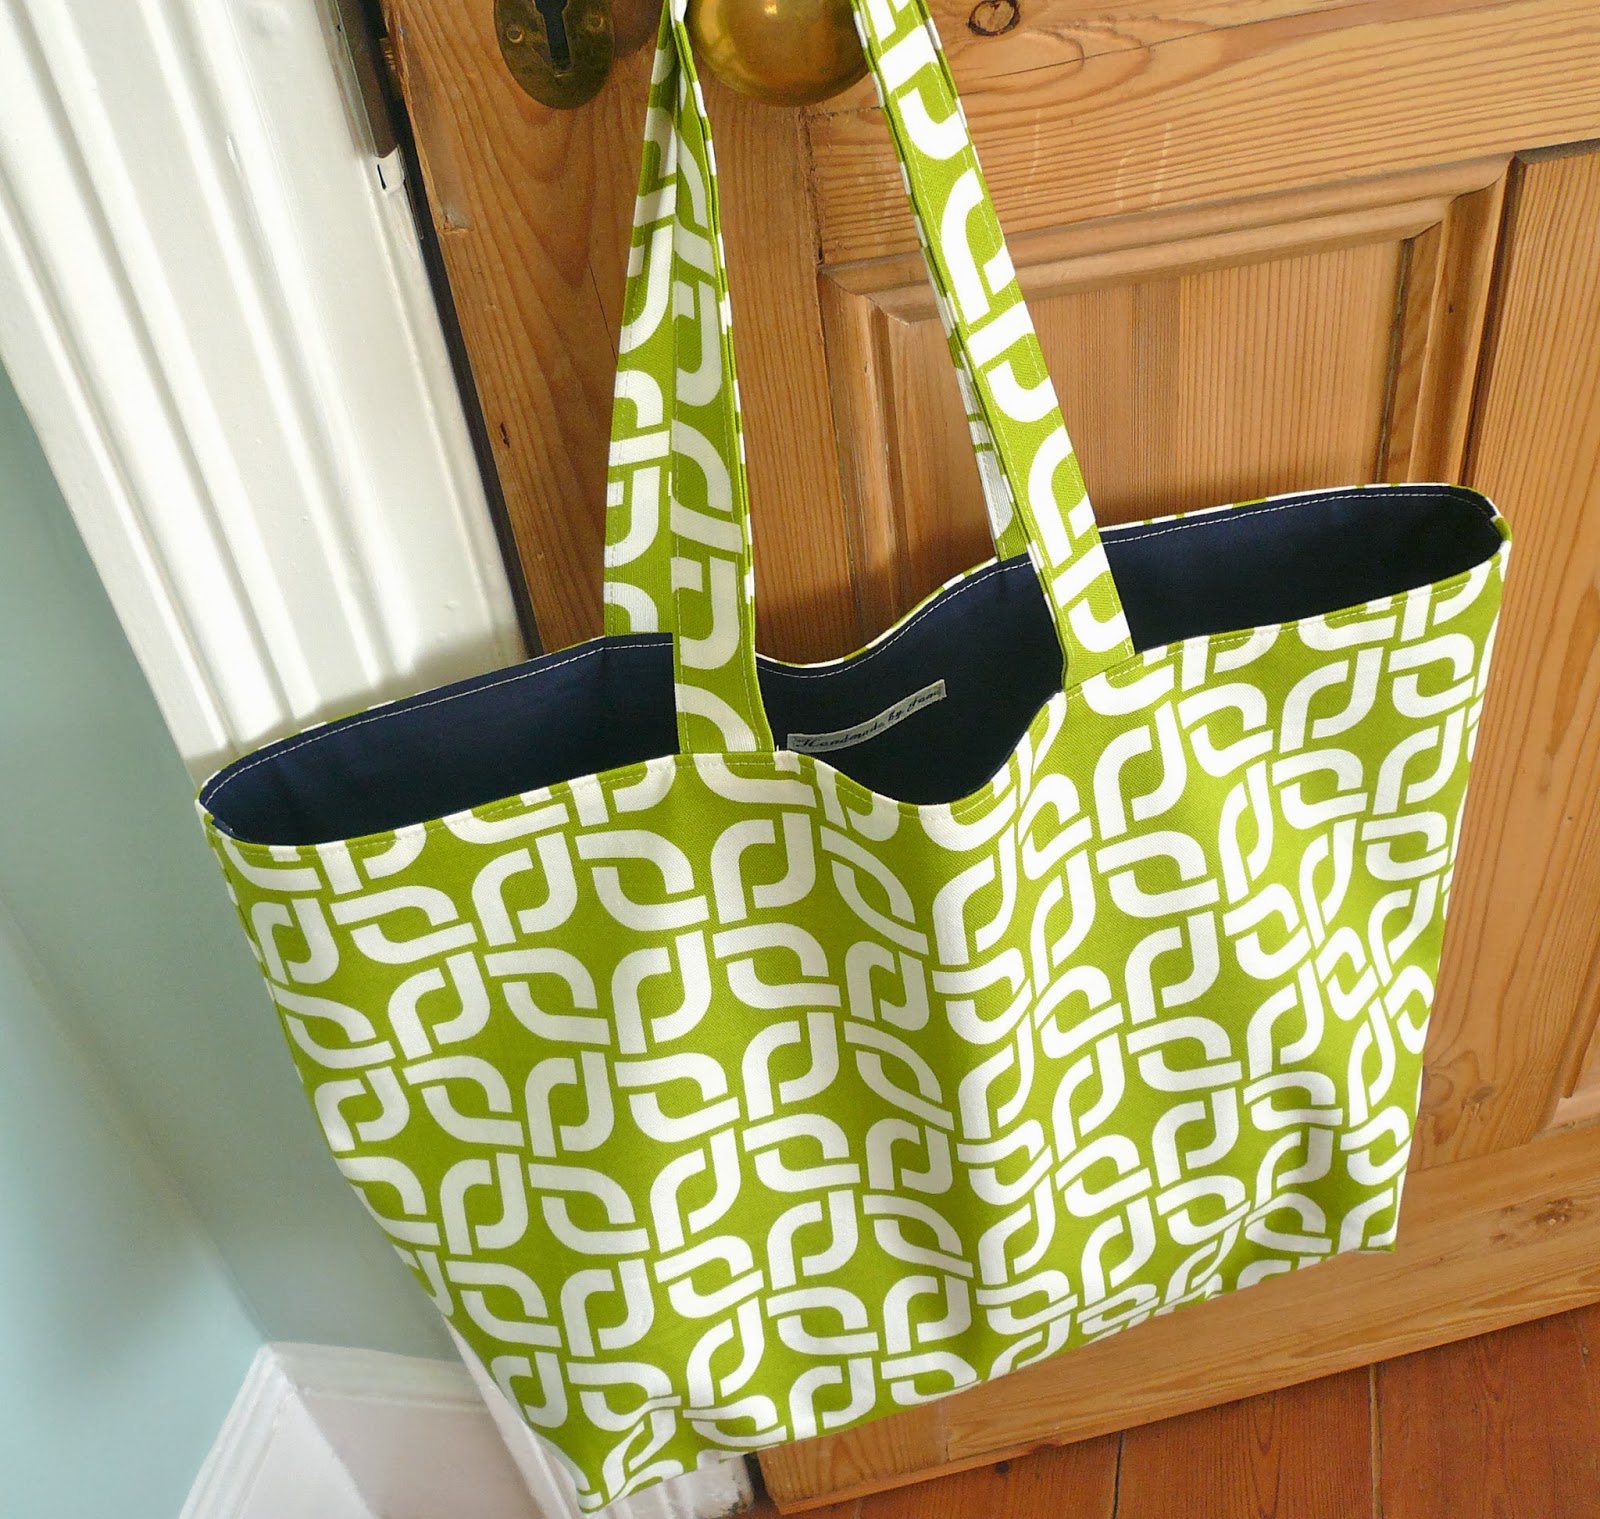 tutorial can be adapted to make a plain tote bag or book bag. This bag ...